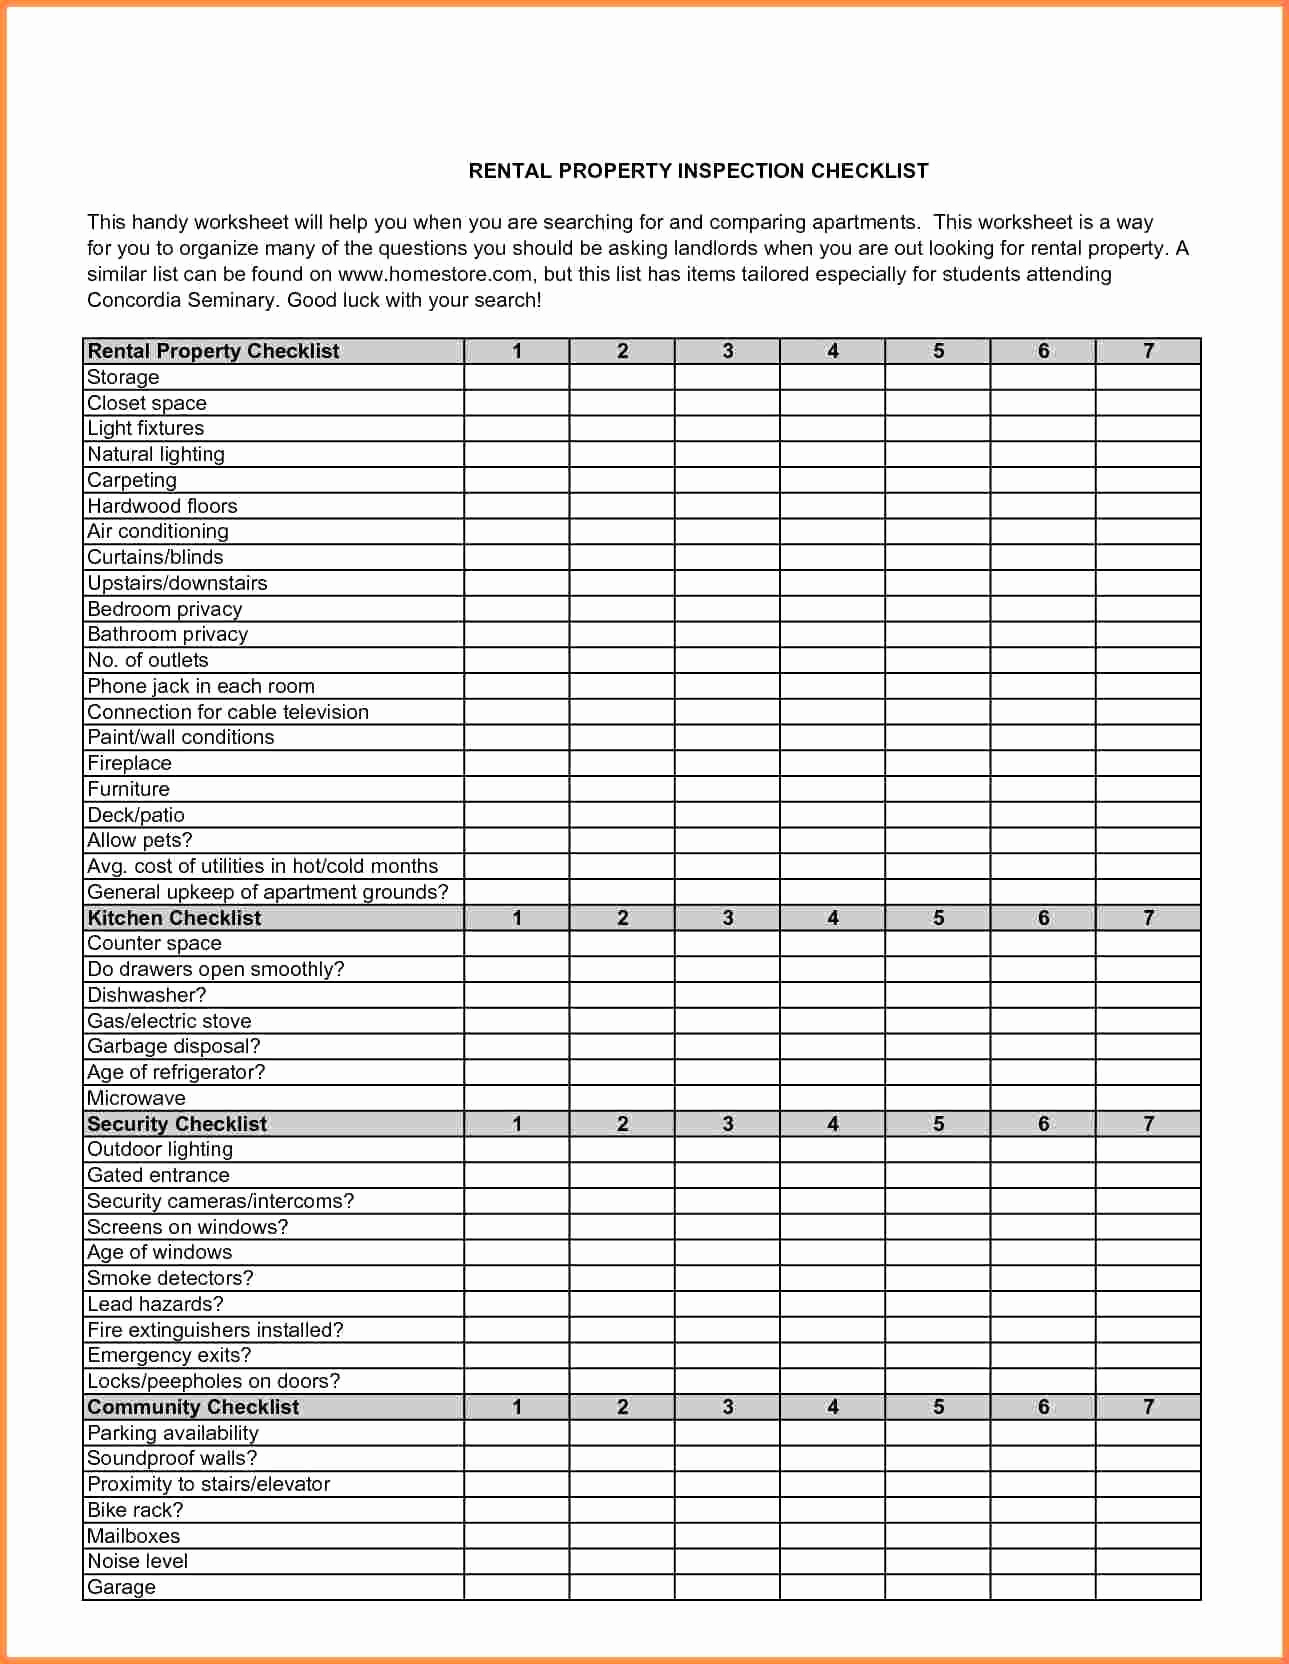 Planning To Buy A House Spreadsheet Within Material List For Building A House Spreadsheet Unique Planning To